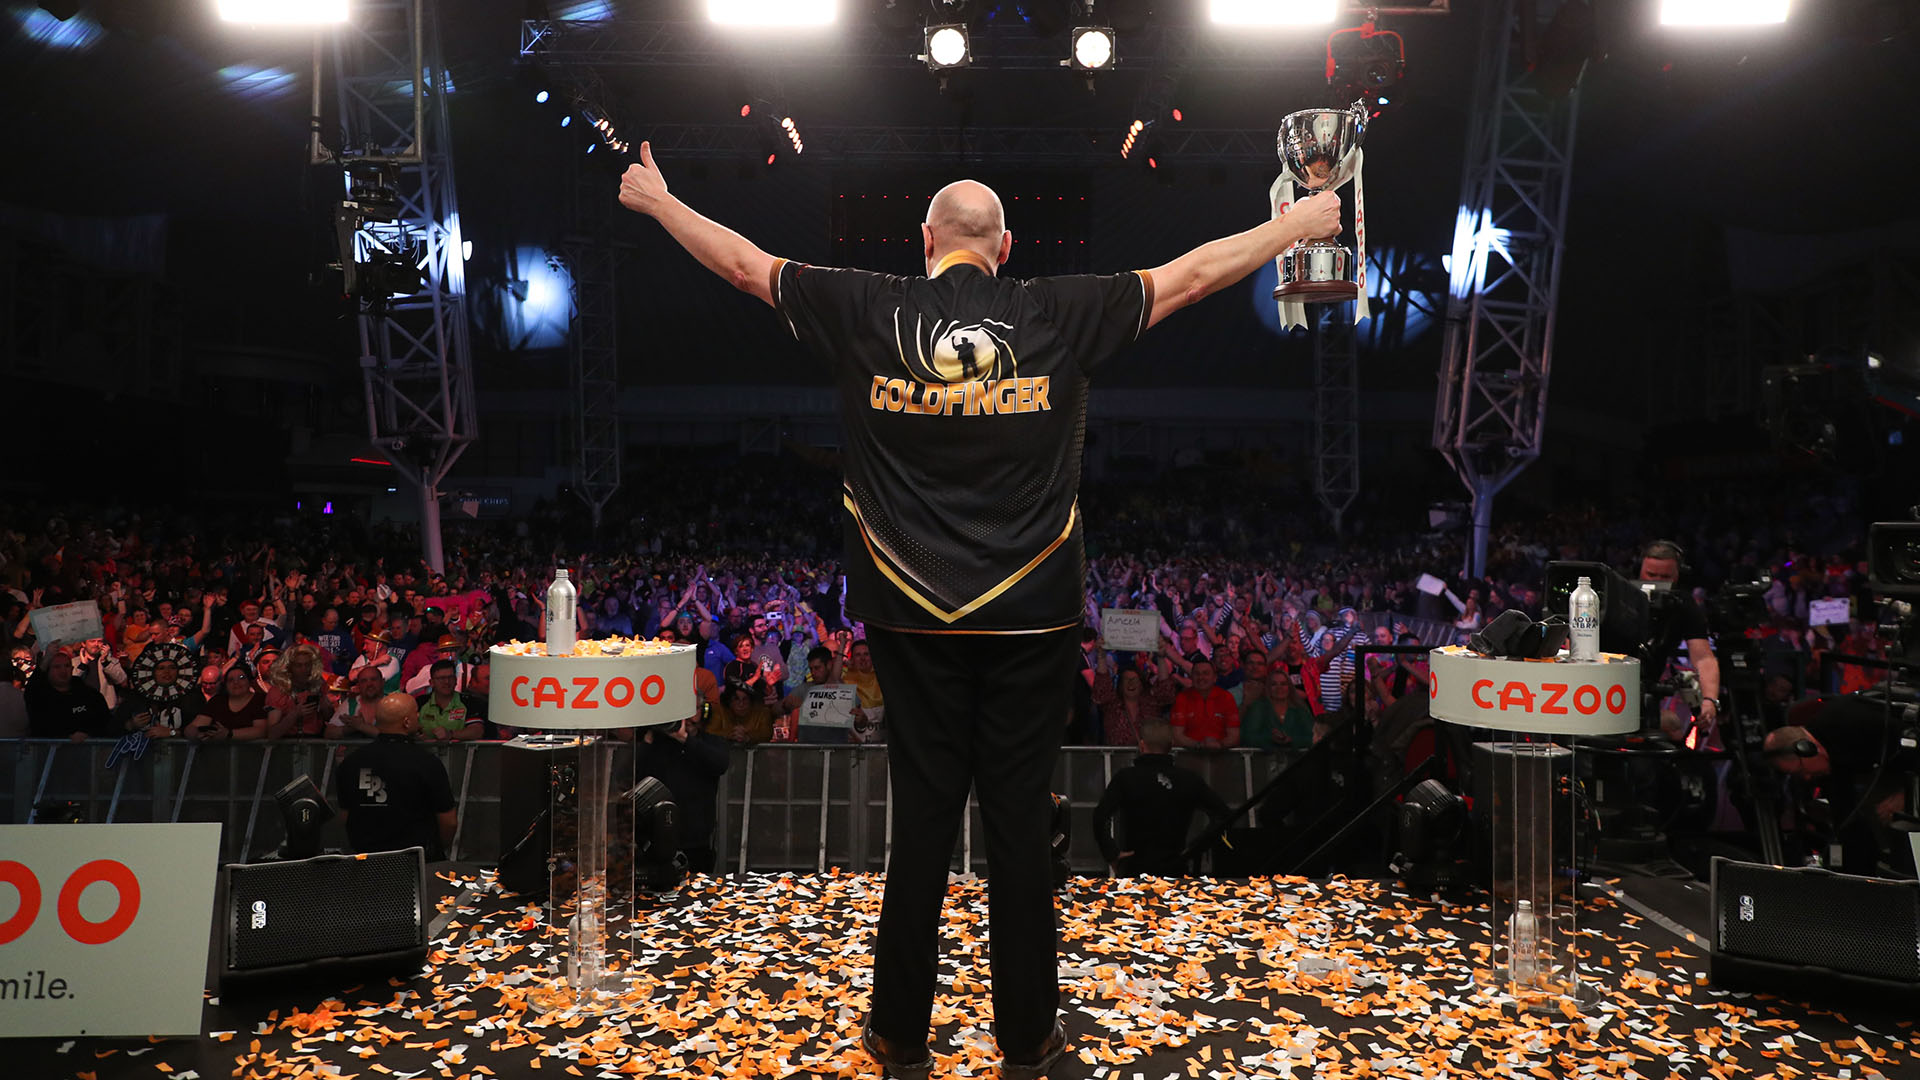 UK Open darts 2023 Draw, schedule, betting odds, results, live ITV4 coverage and tickets